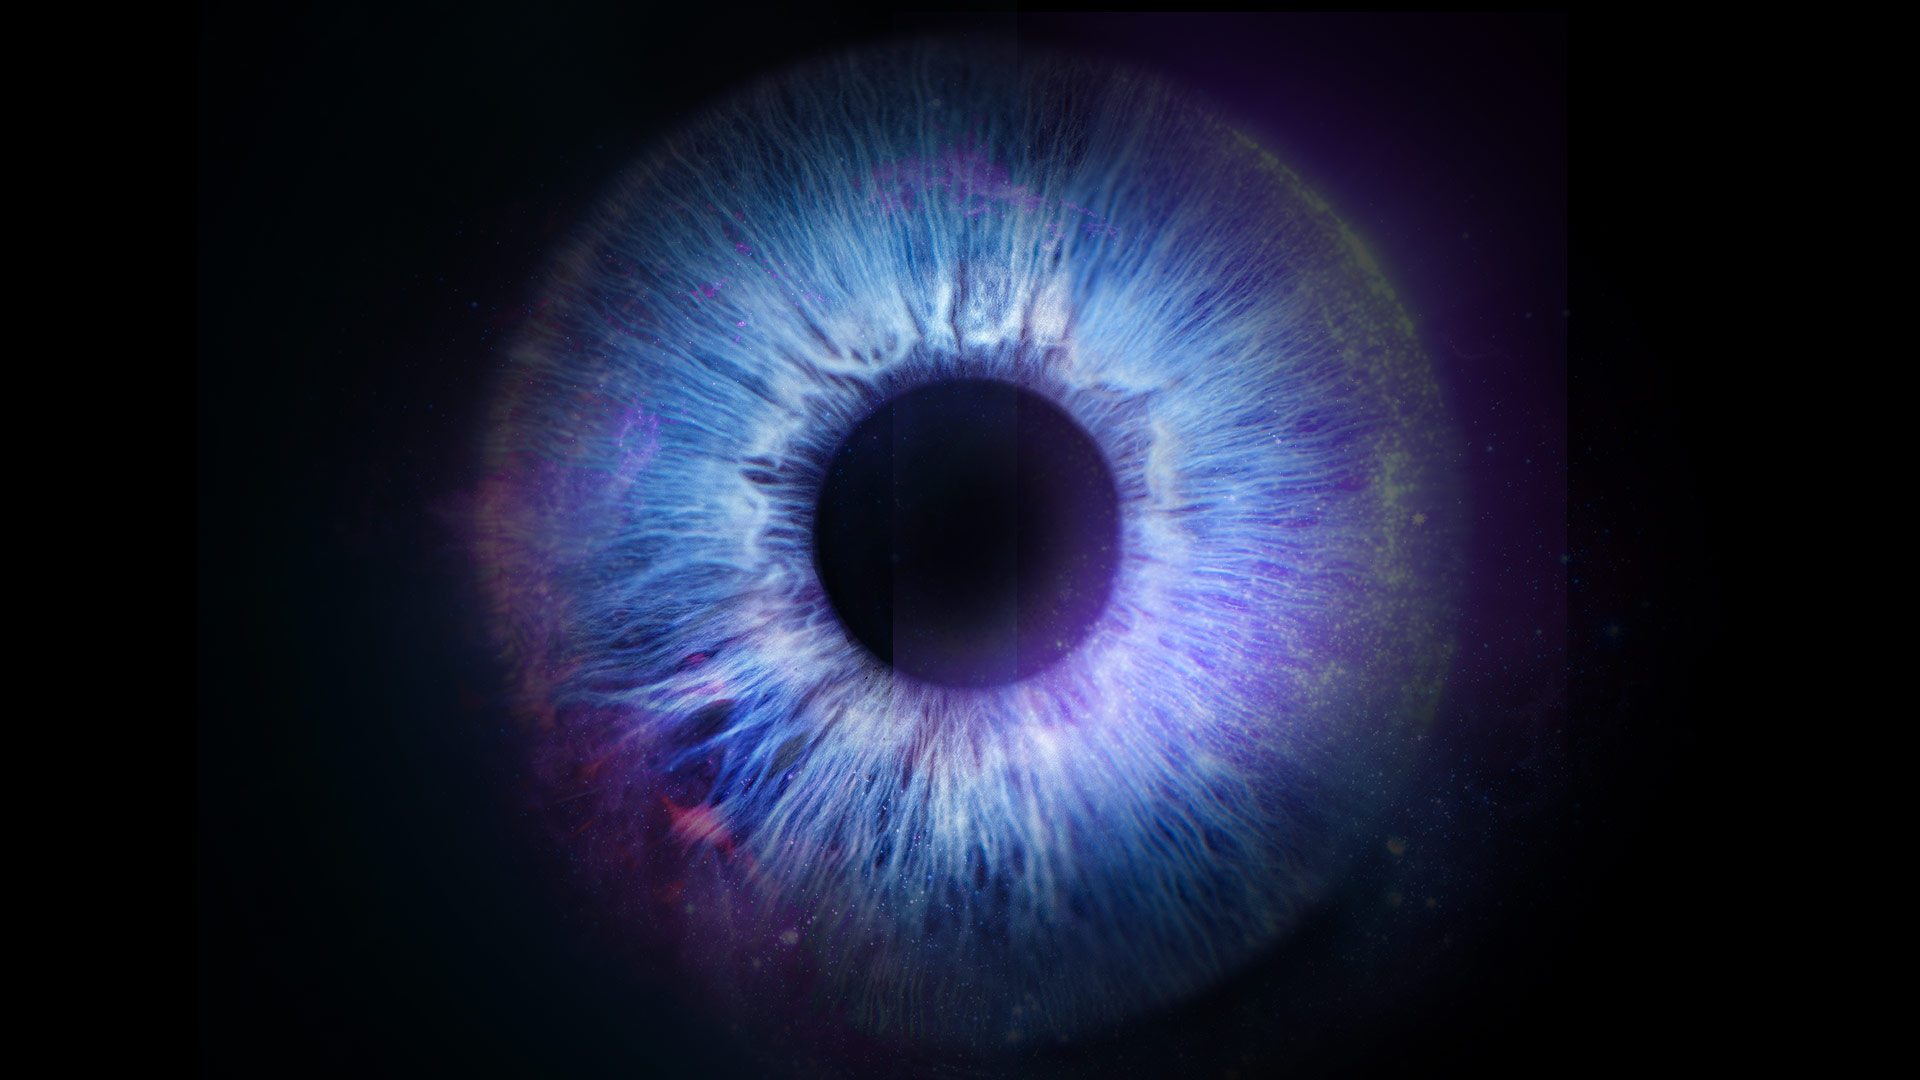 Blue eye with electricity in the iris